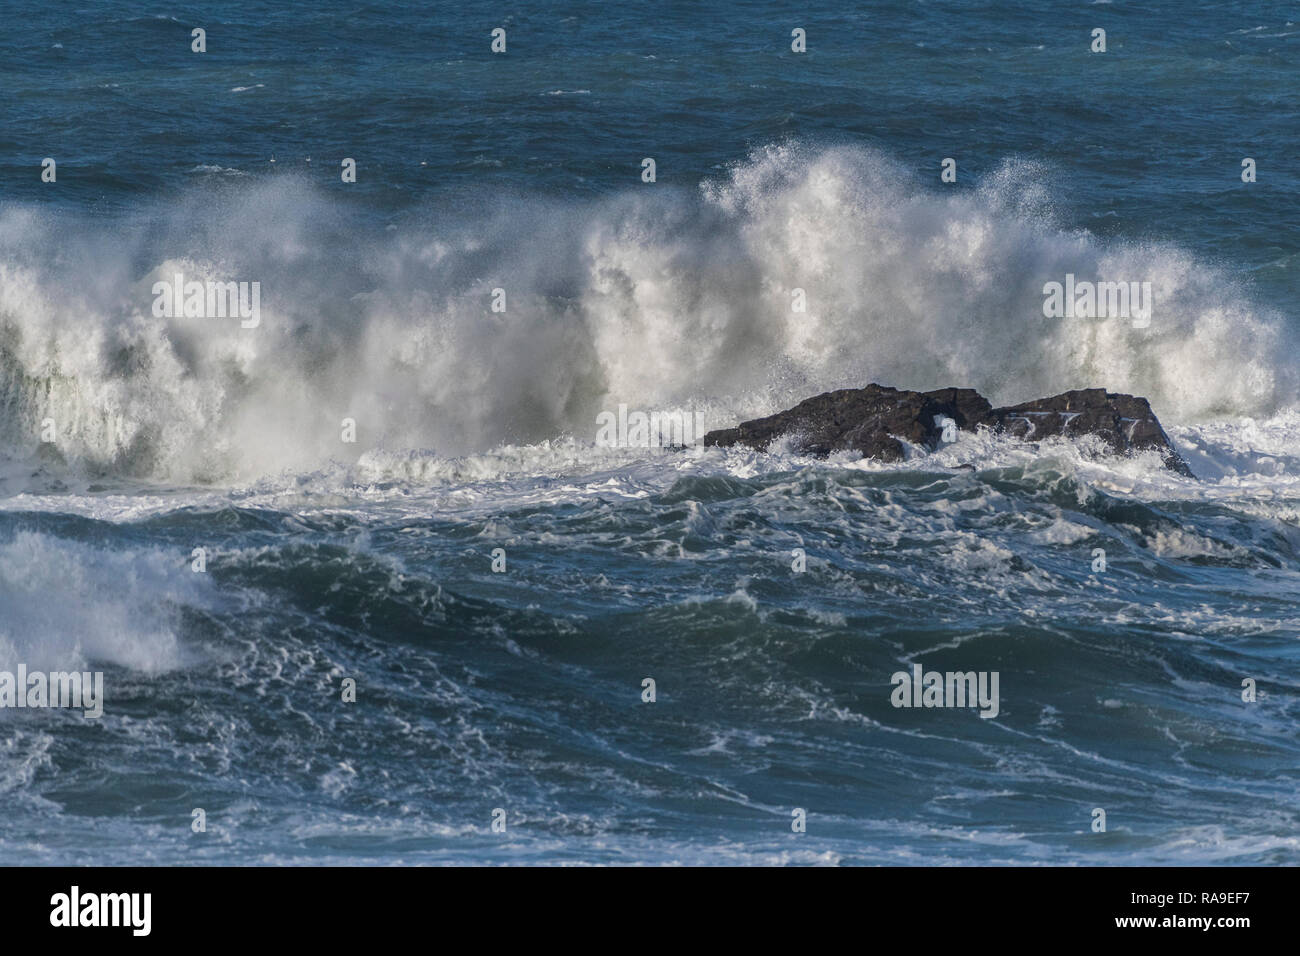 A large wave breaking on rocks in the sea. Stock Photo